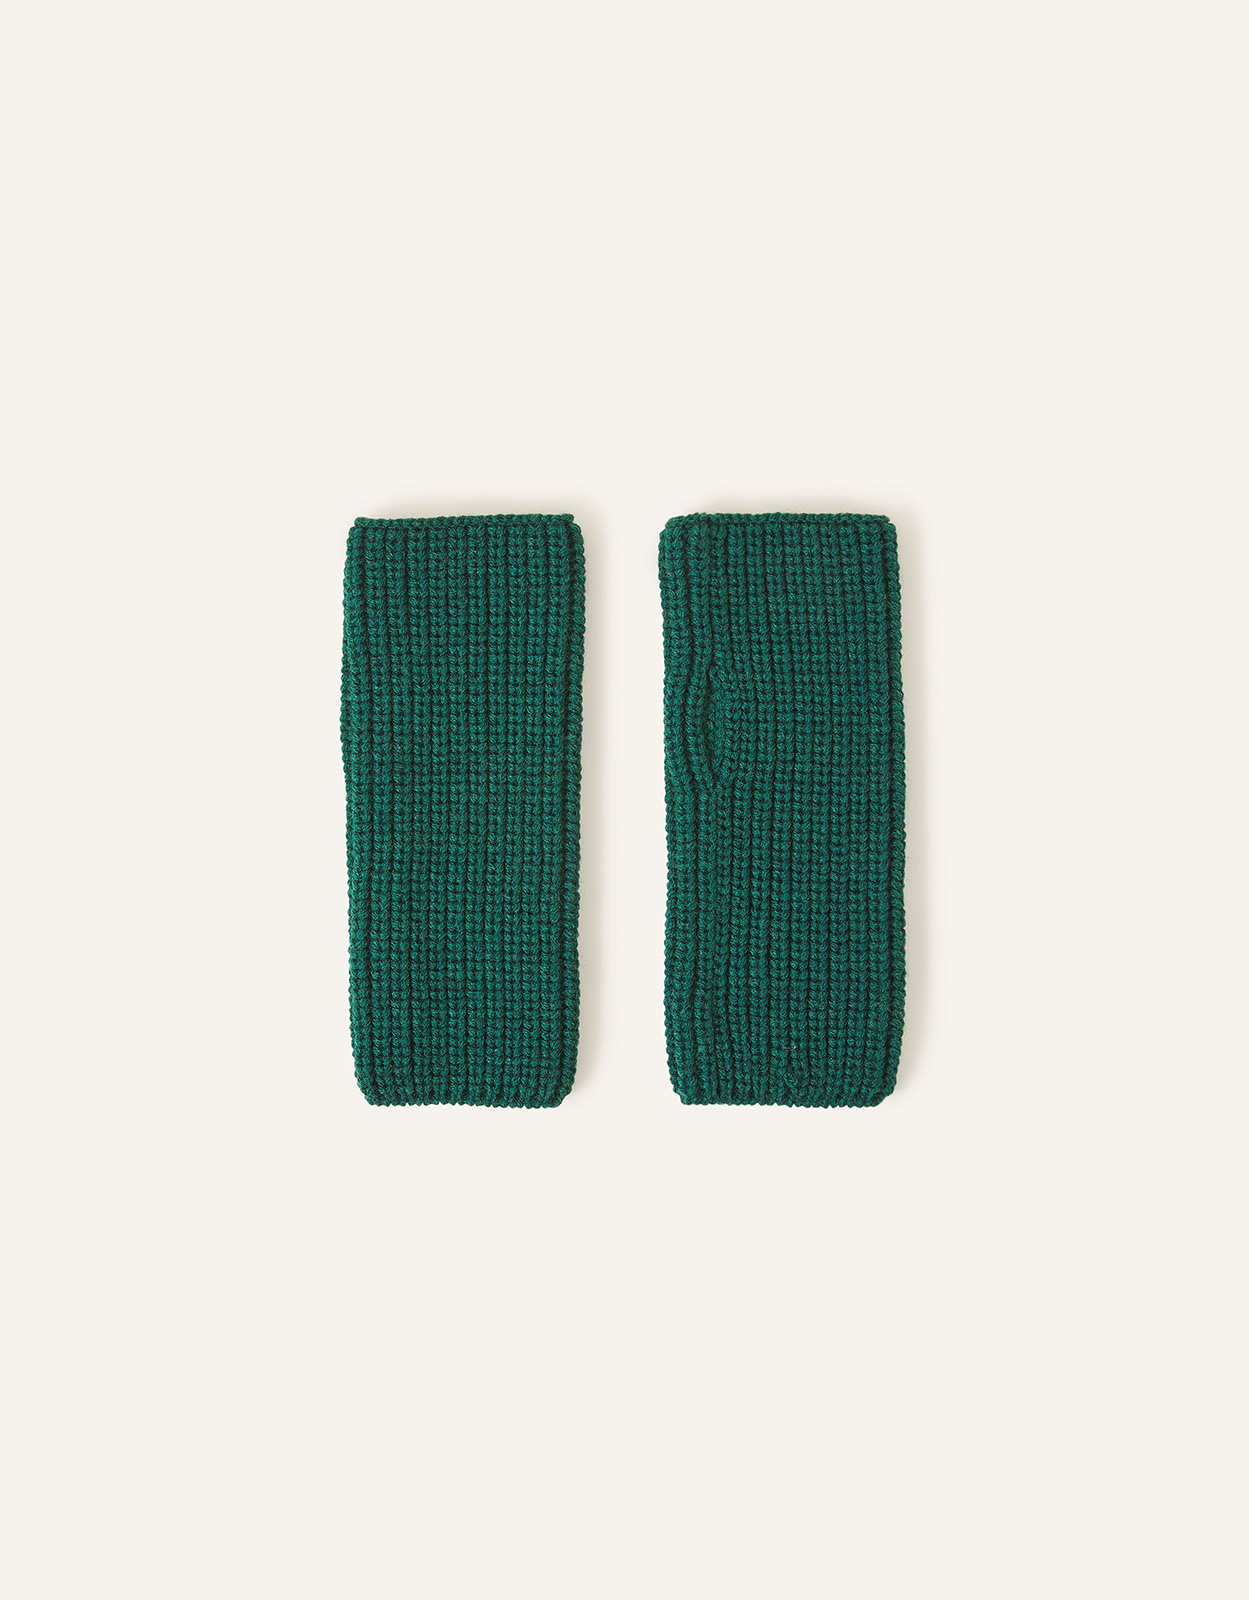 Accessorize Ribbed Cut Off Gloves Green, Size: 8x21cm